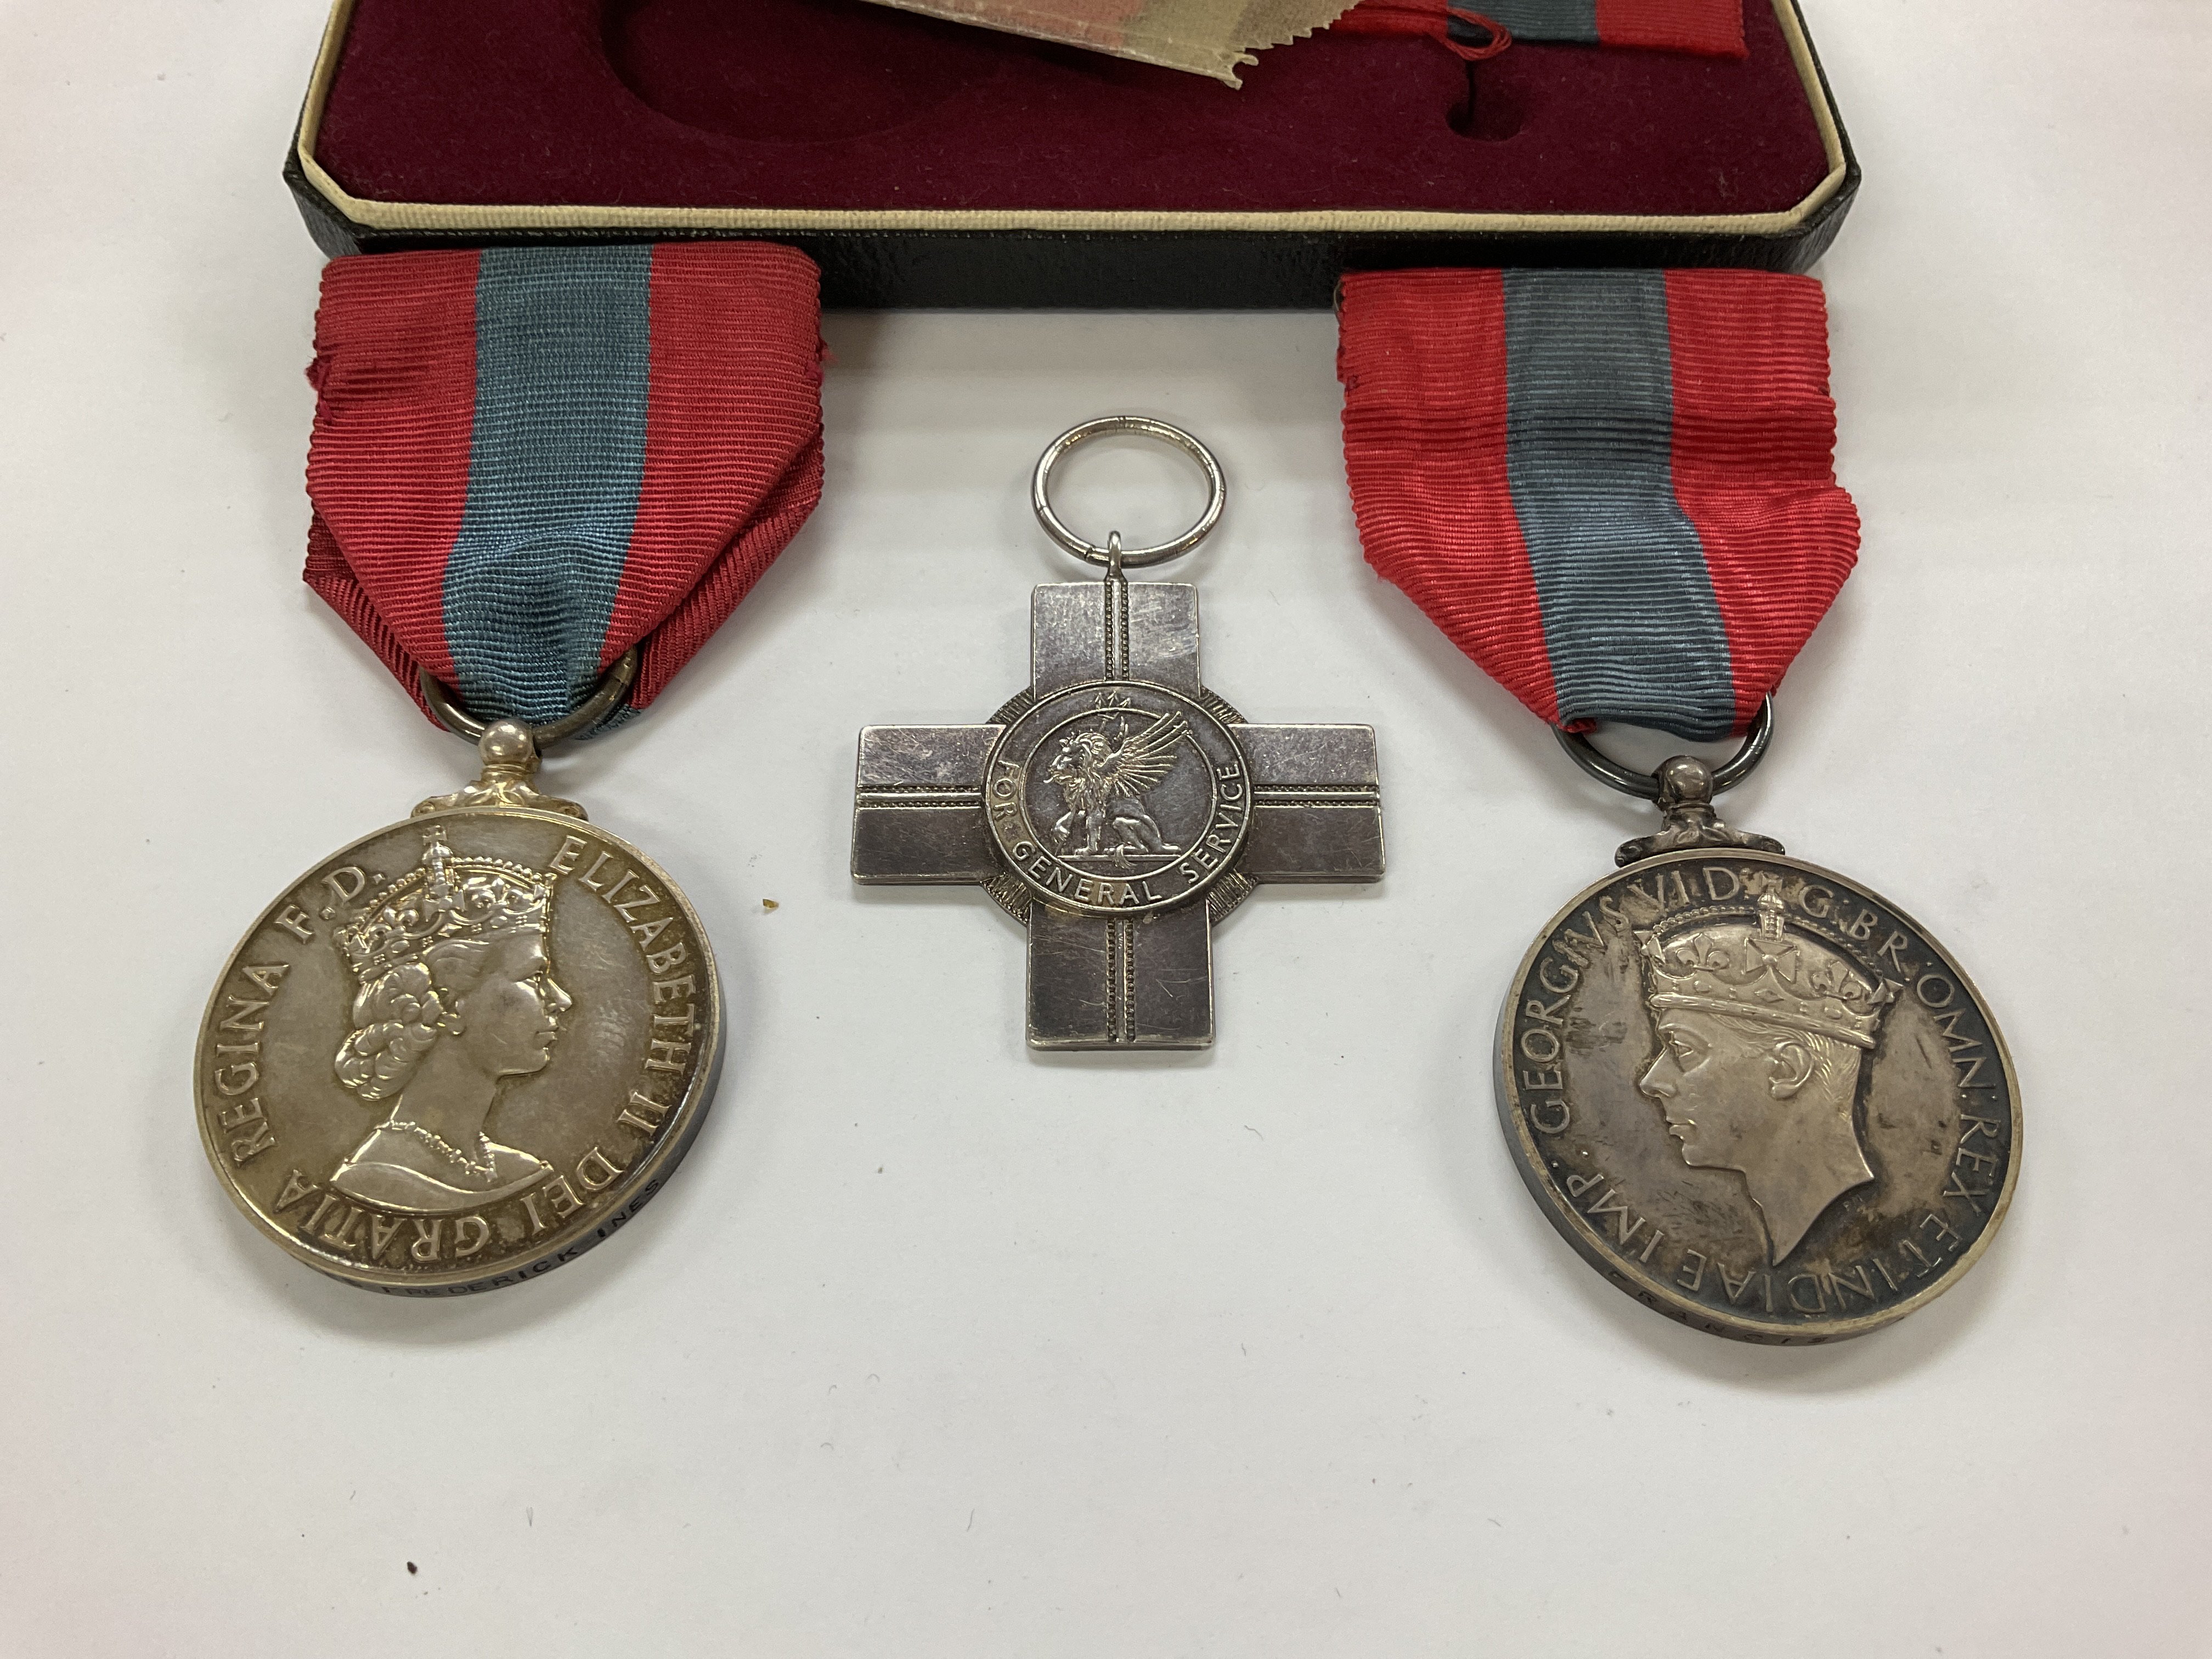 2 Imperial service medals, 1 for Francis Agger, th